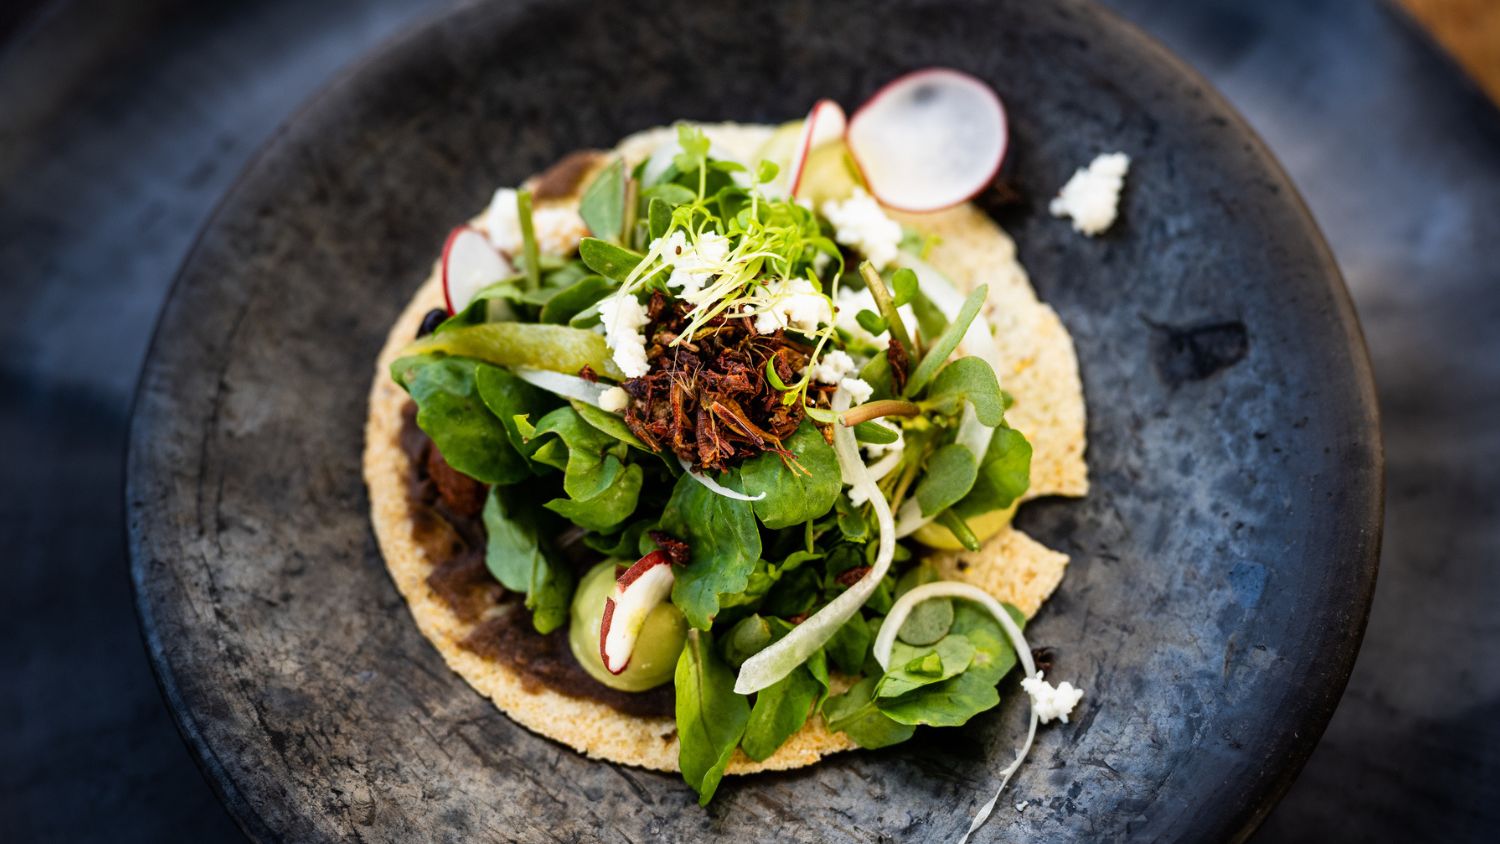 mole tostada topped with chapulines (grasshoppers) and quelites (greens) served on a black clay plate from Oaxaca